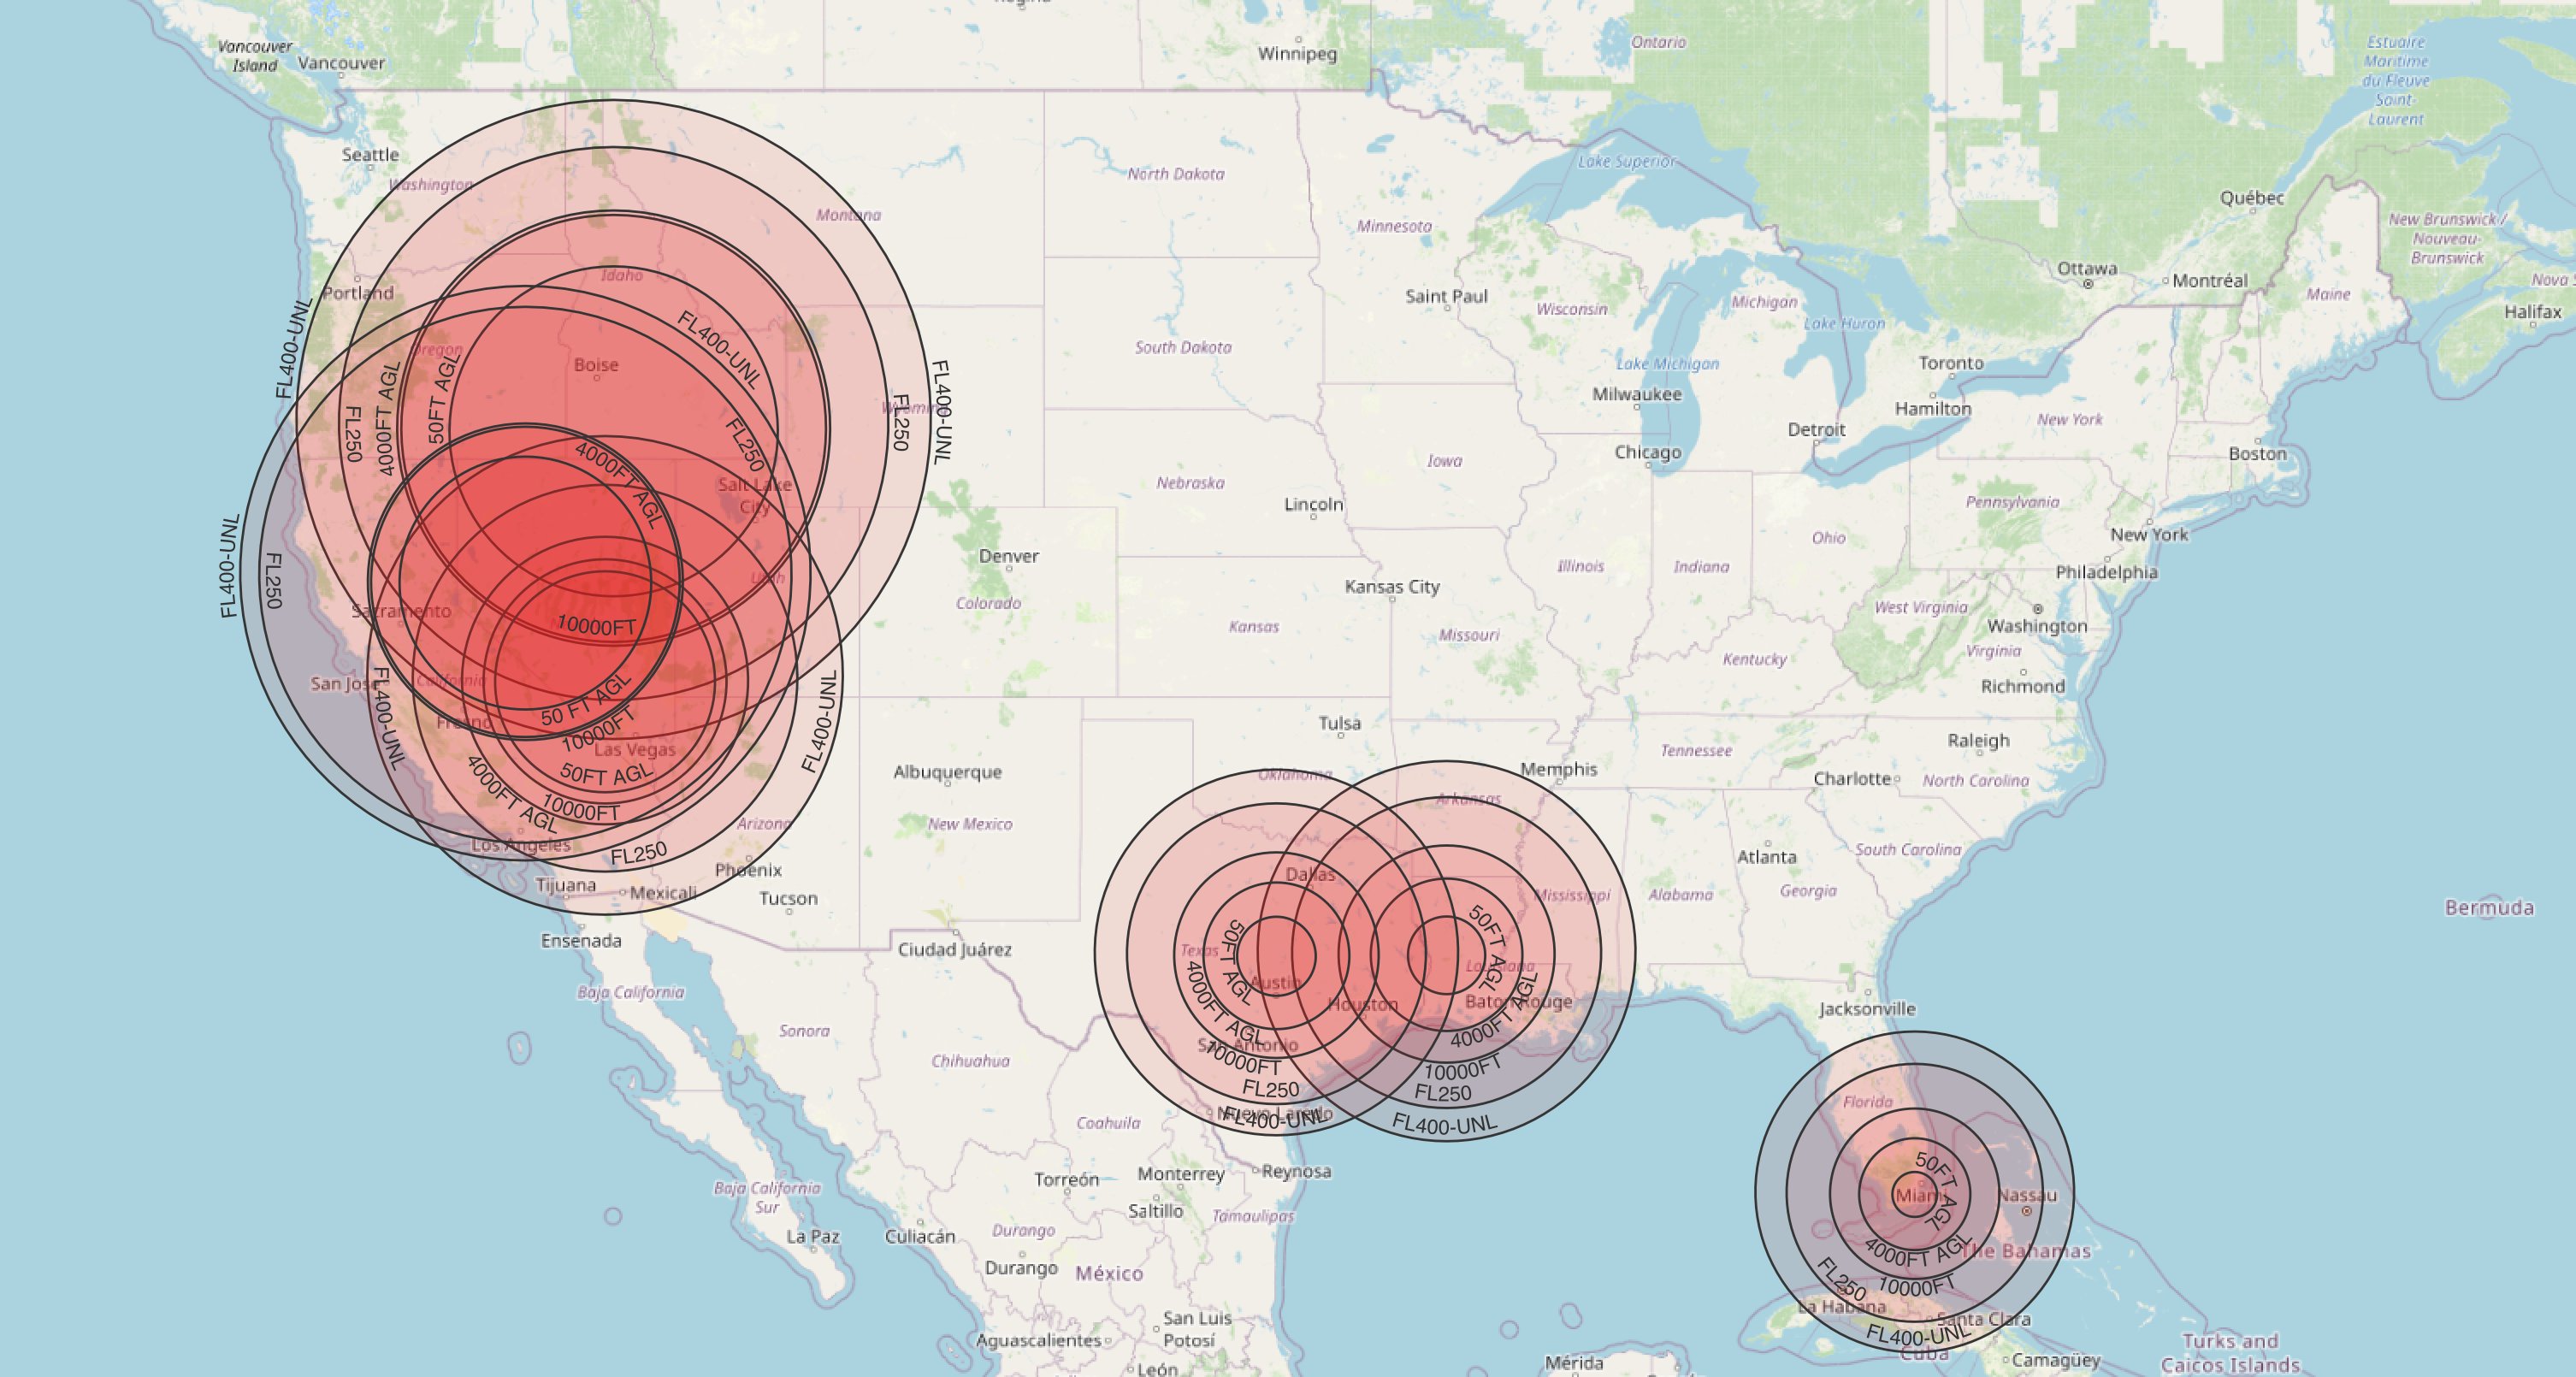 John Wiseman on Twitter: "Here's next week: By 1/24, there will be 6 GPS interference NOTAMS in effect. of them blanketing the Western U.S.: The Nevada Test and Training